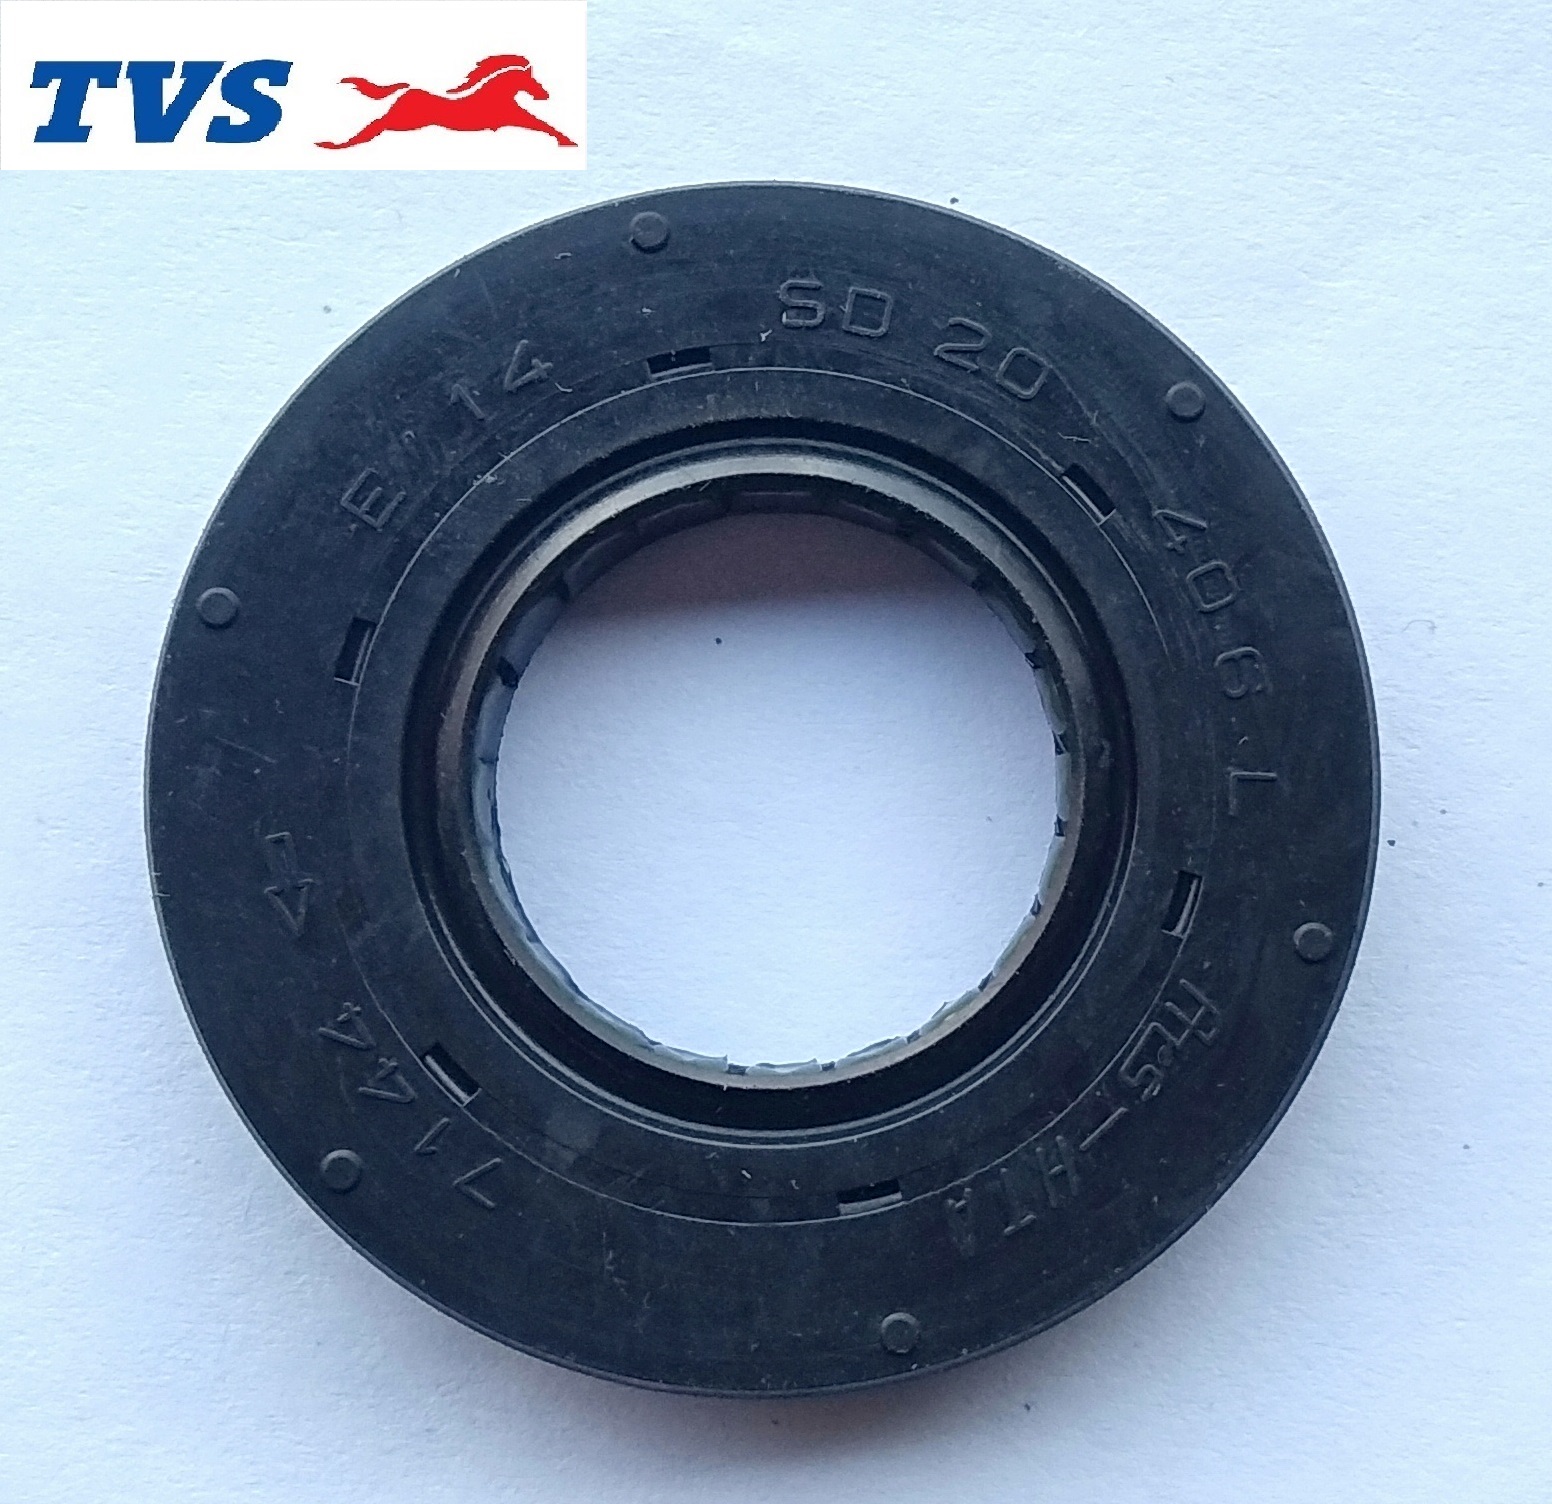 tvs apache spare parts online shopping